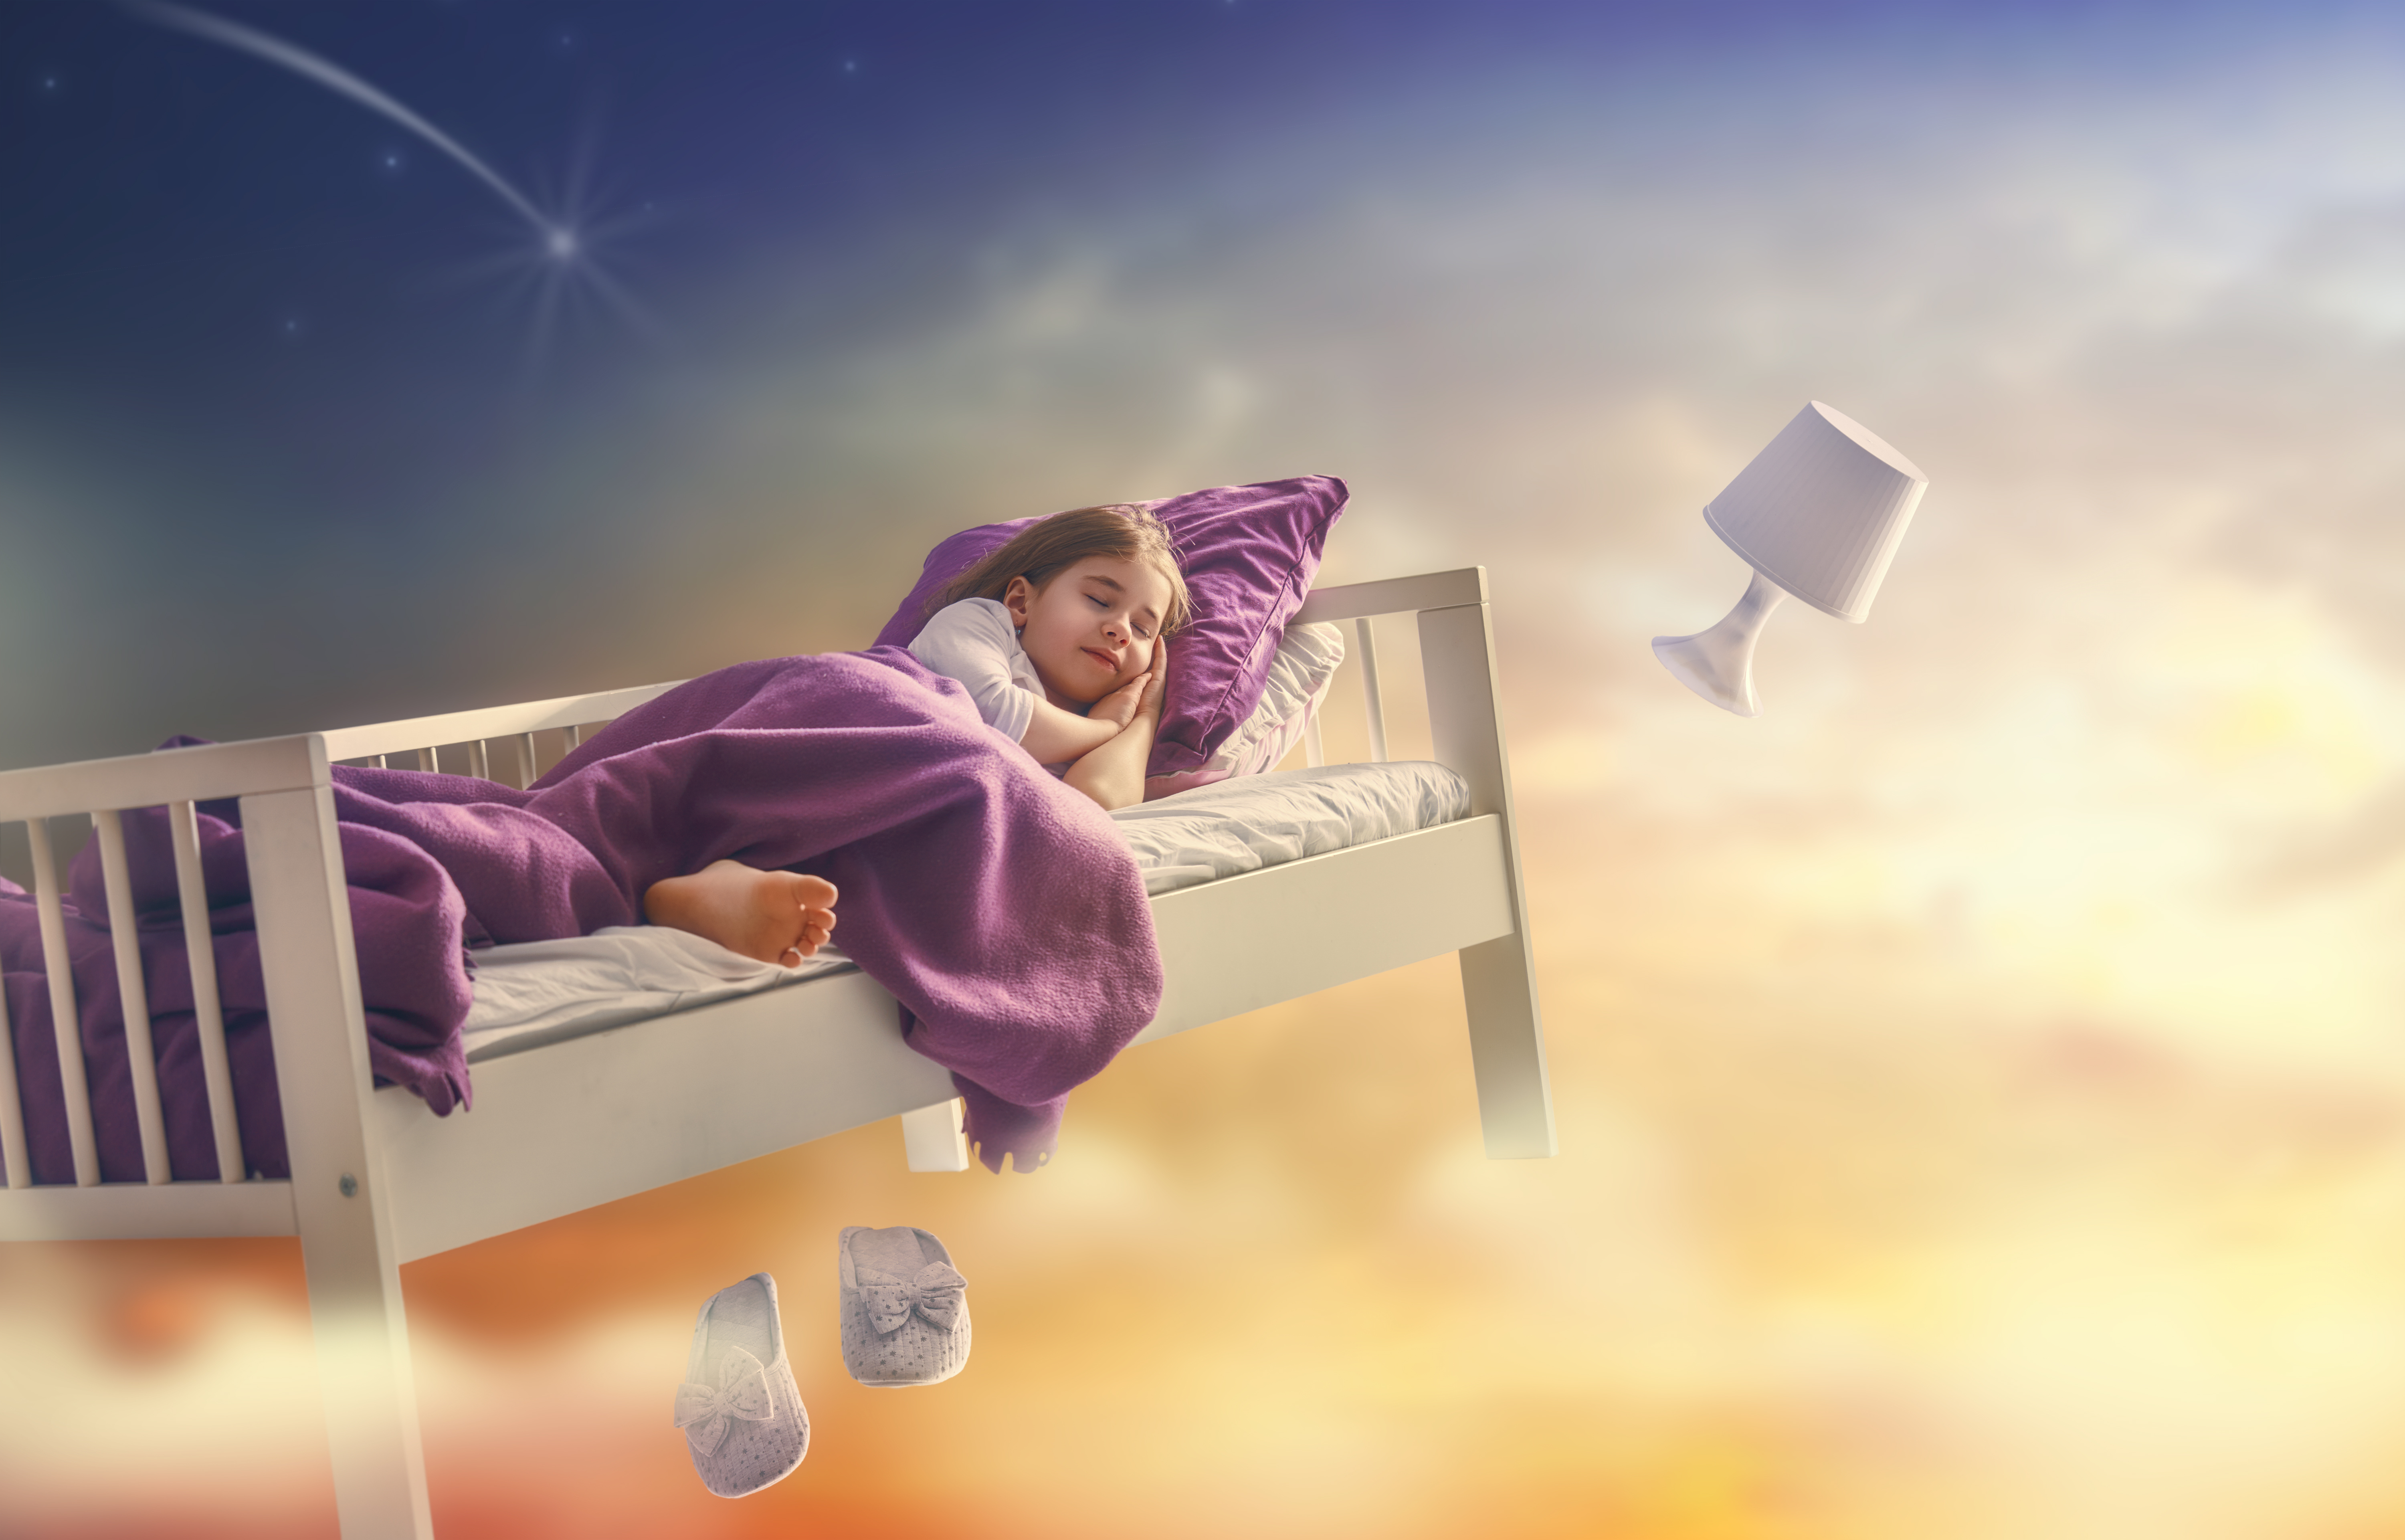 Image of a little girl alseep in her bed, drifting through the sky